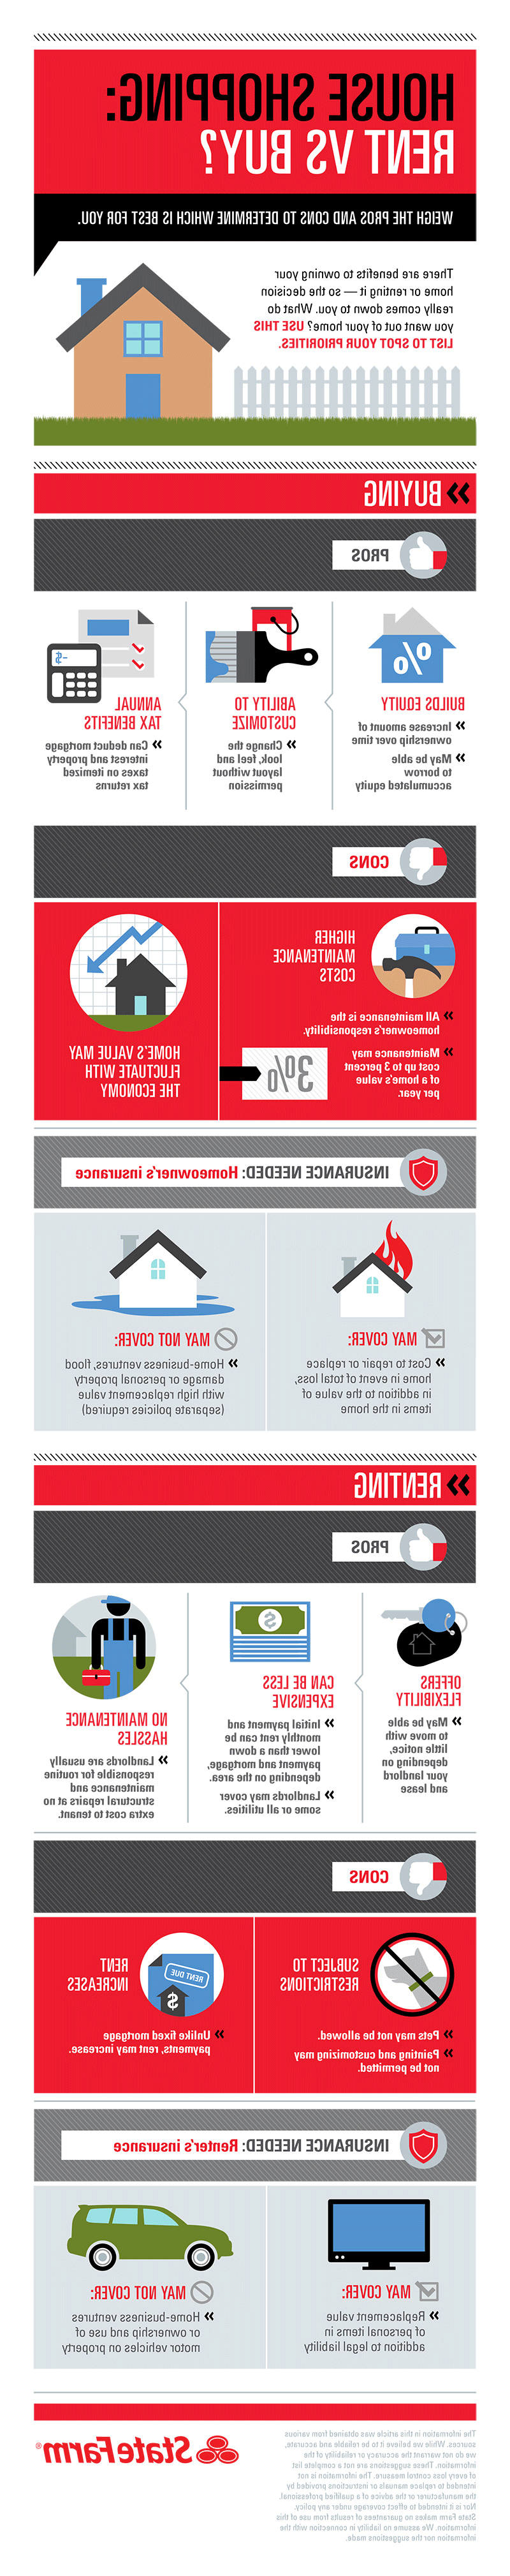 Infographic showing common pros and cons for 买ing vs renting a home.